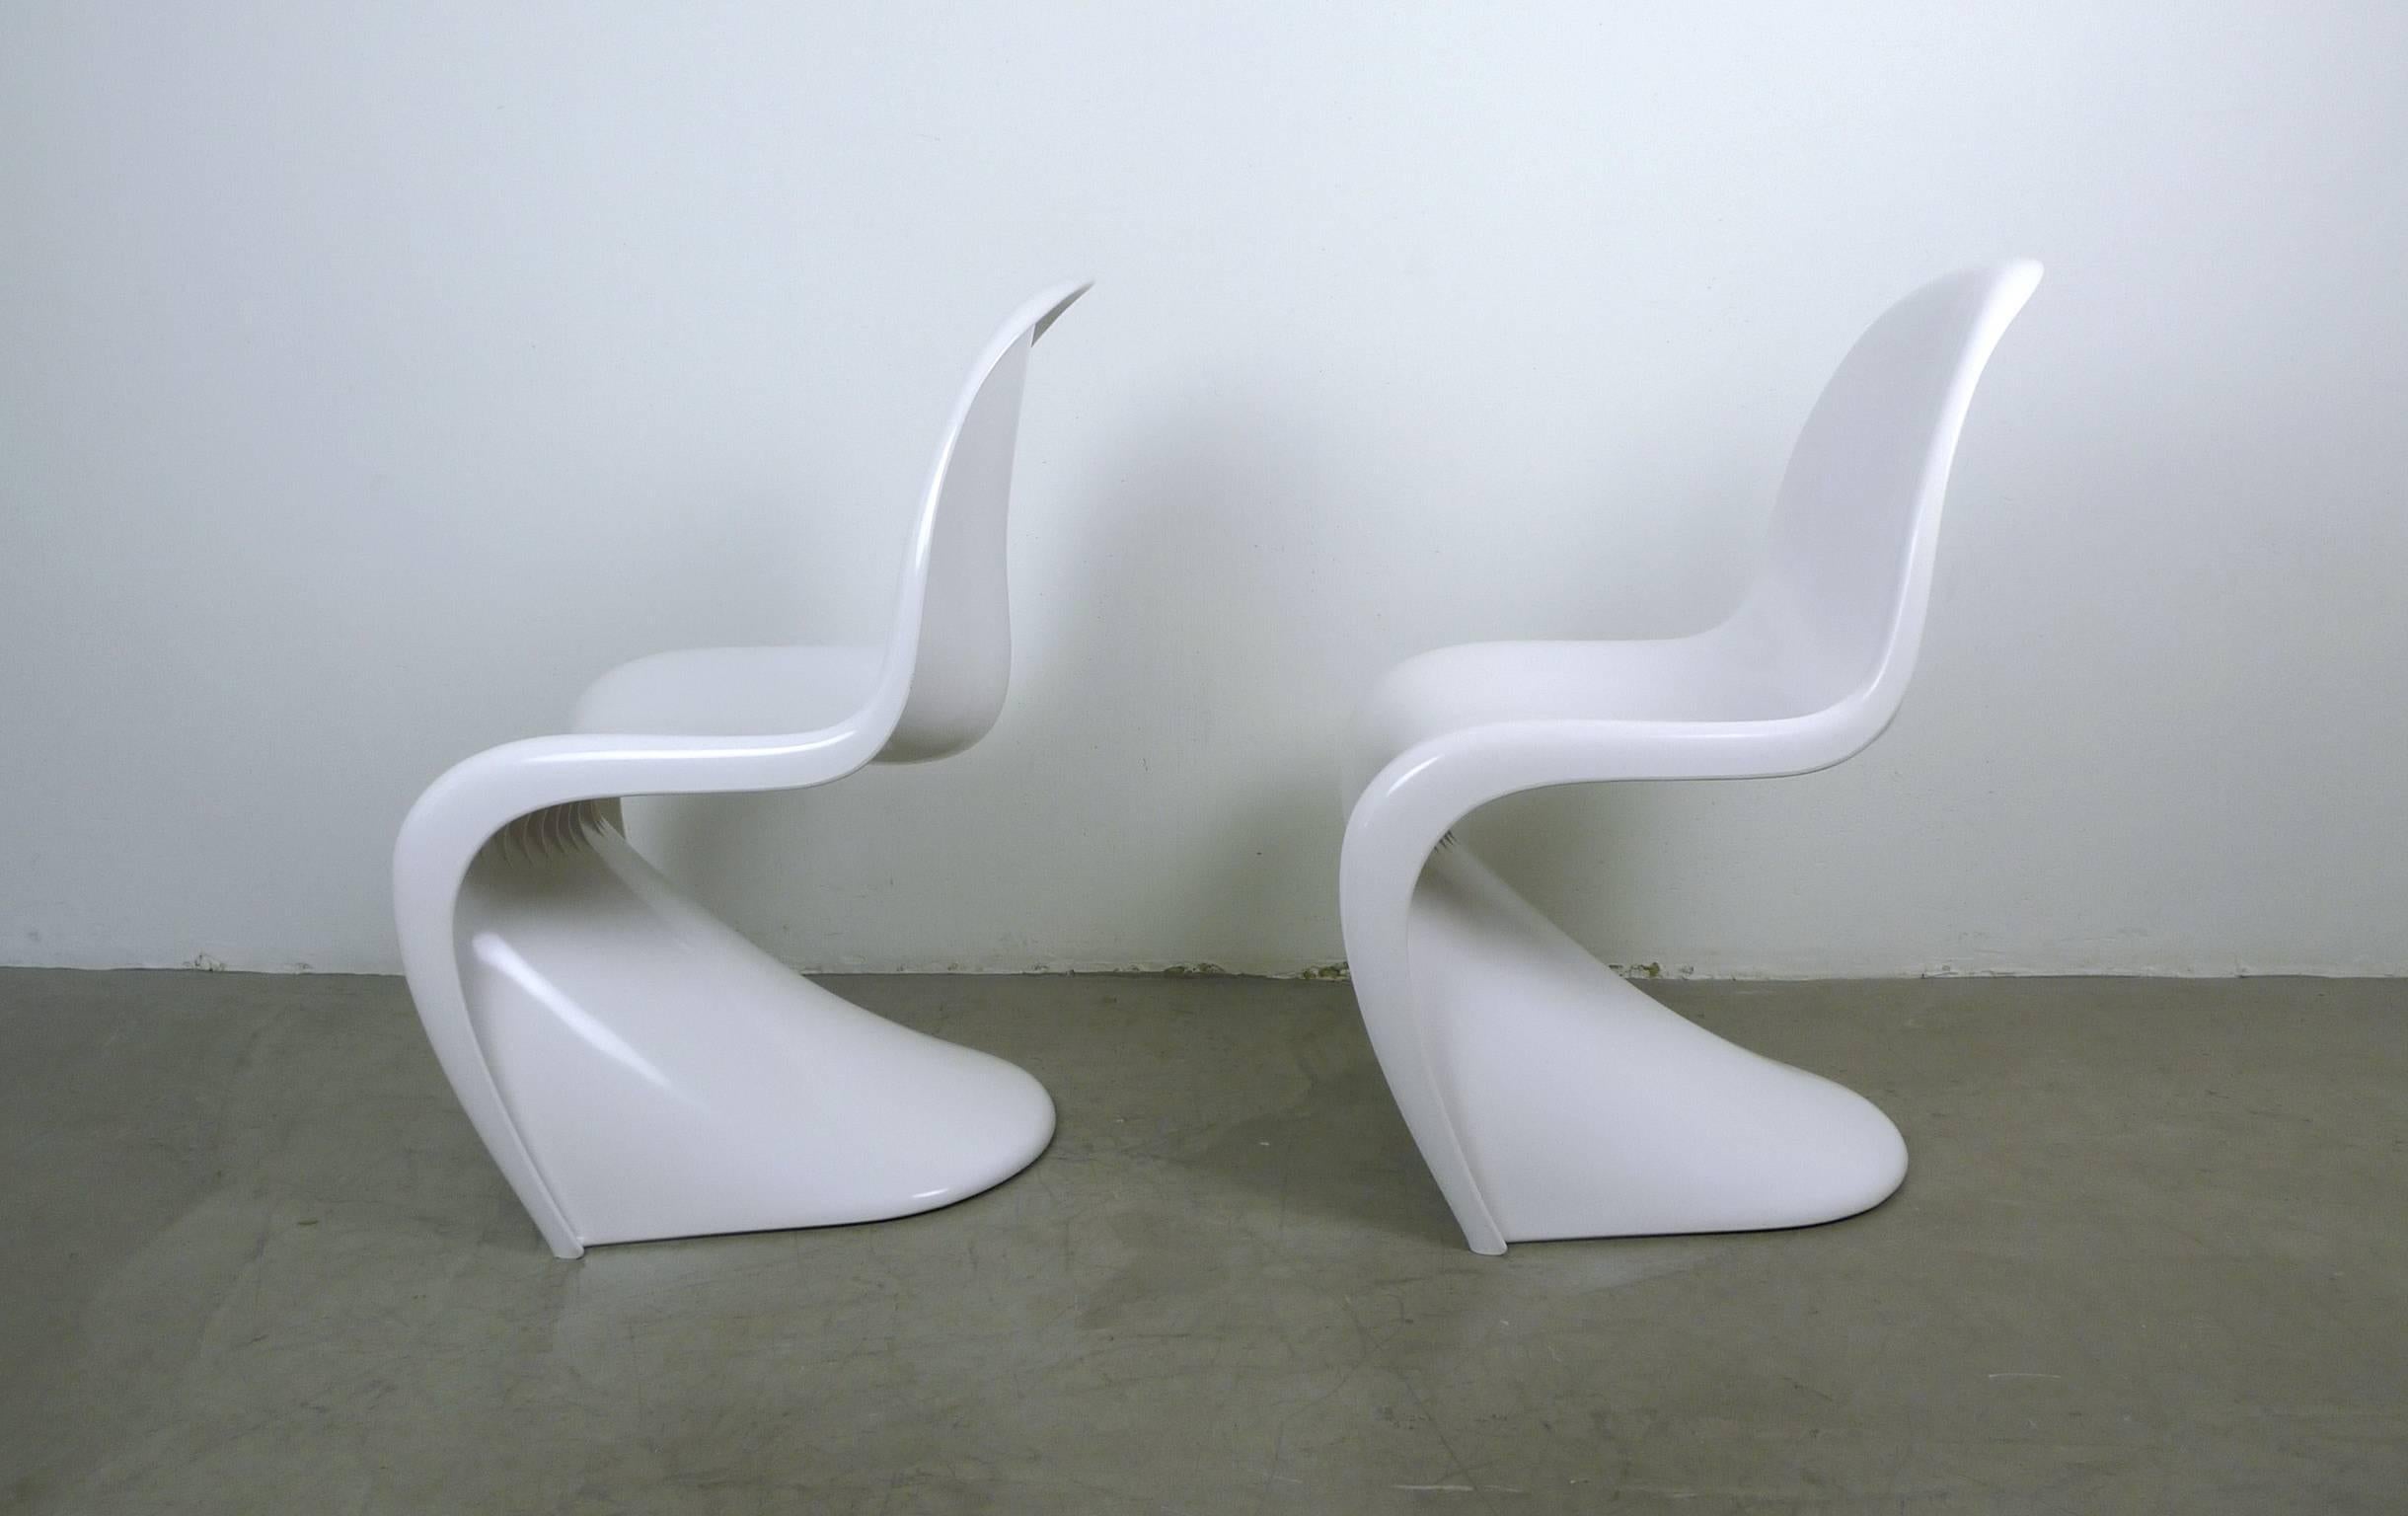 Space Age Pair of White Panton Chairs by Verner Panton for Fehlbau from 1971 and 1972 For Sale